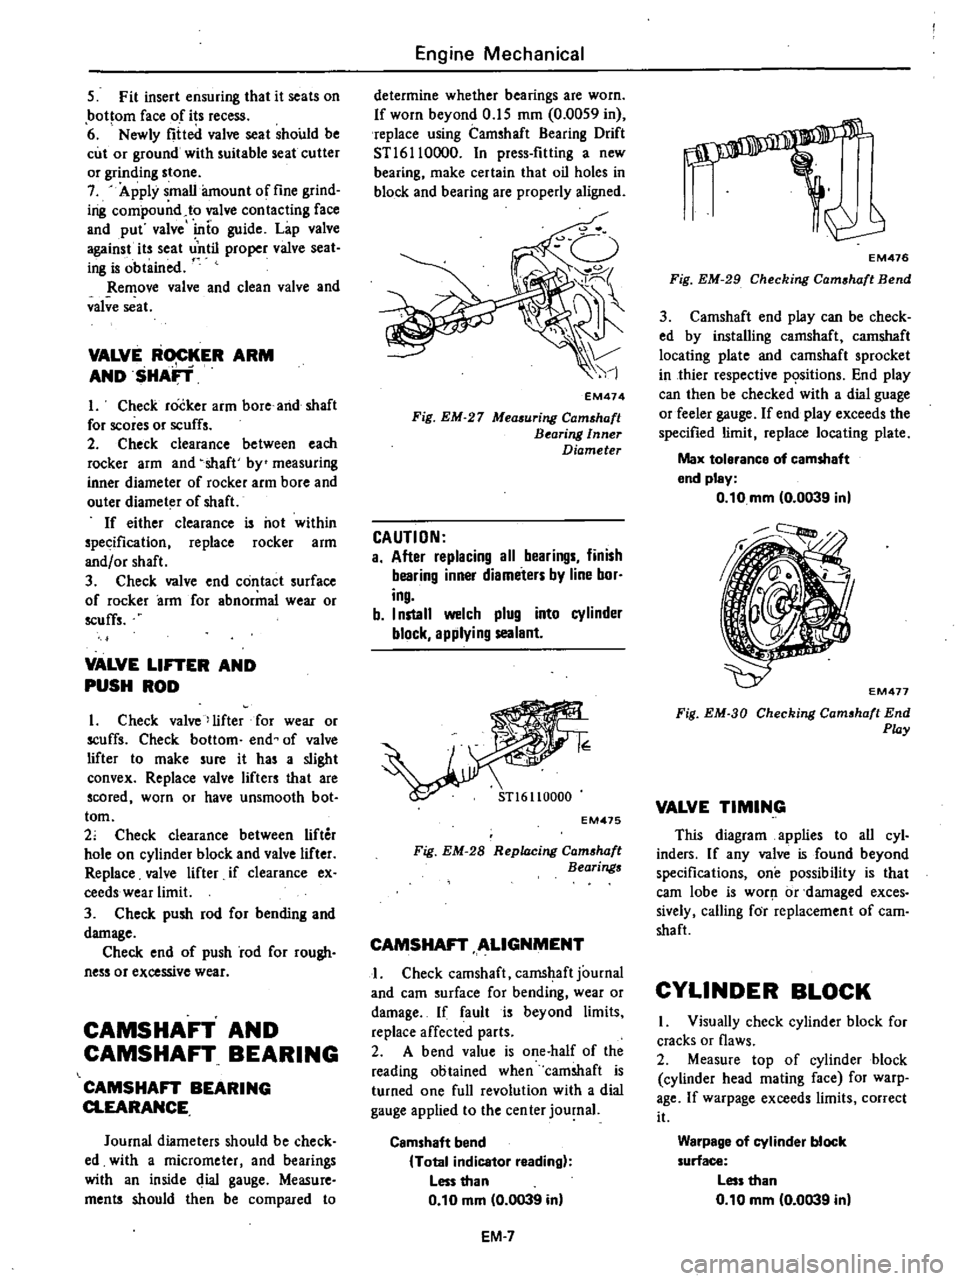 DATSUN 210 1979 Workshop Manual 
5

Fit 
insert

ensuring 
that 
it

seats 
on

bottom 
face 
of 
its

recess

6

Newly 
fitted 
valve 
seat 
should 
be

cut 
or

ground 
with 
suitable 
seat 
cutter

or

grinding 
stone

7

Apply 
